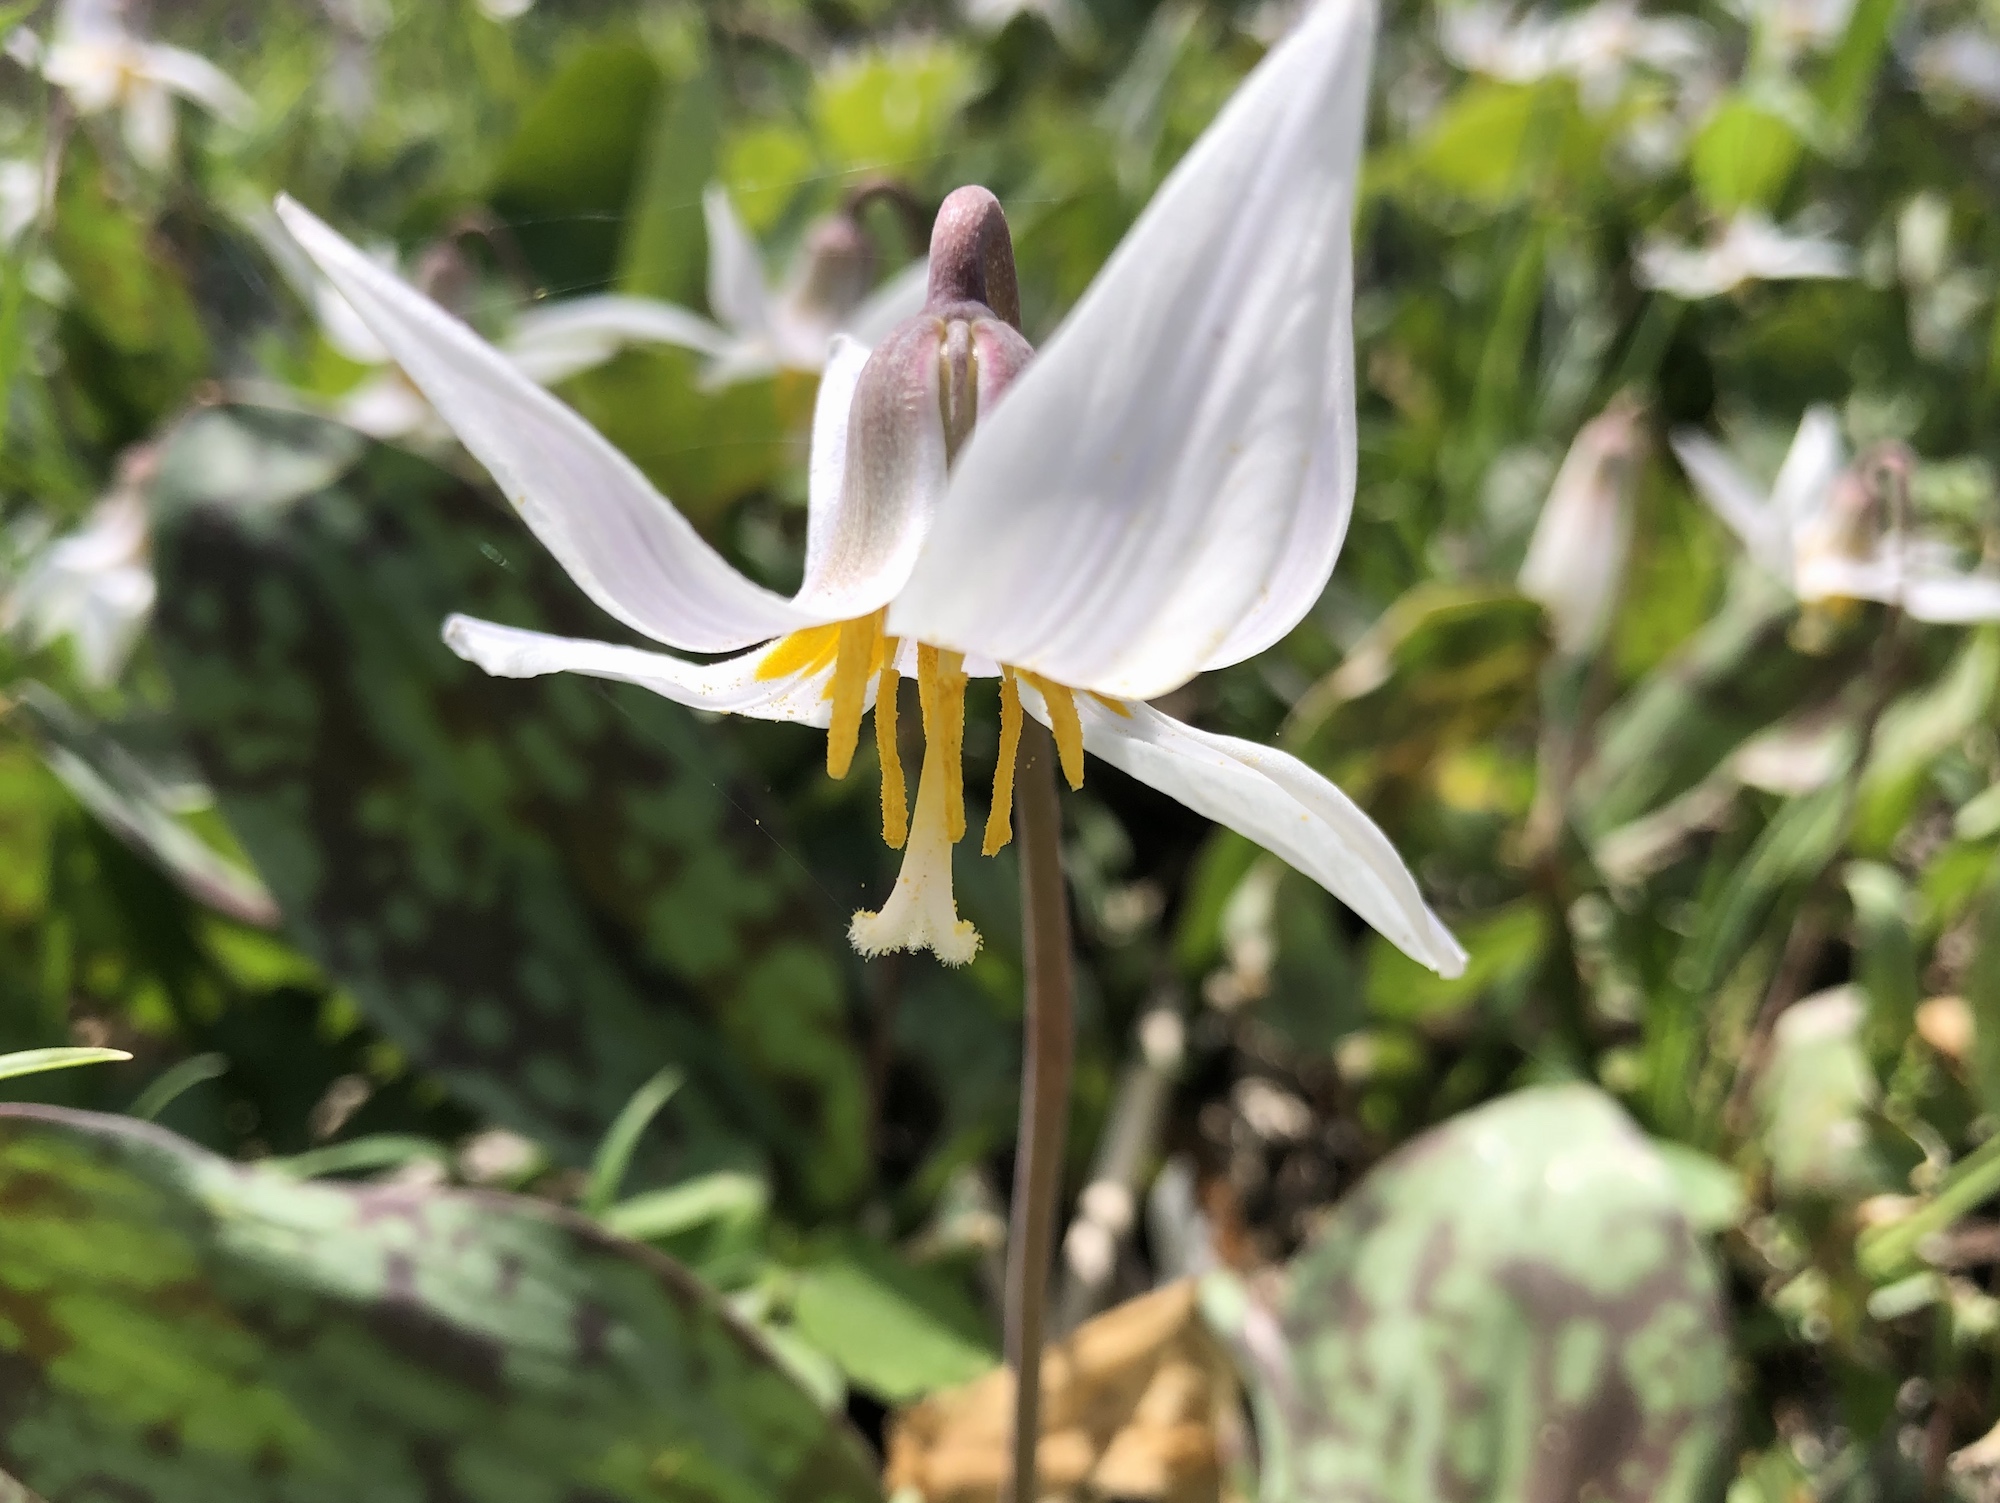 Trout Lily in Oak Savanna by Council Ring in Madison, Wisconsin on May 1, 2020.